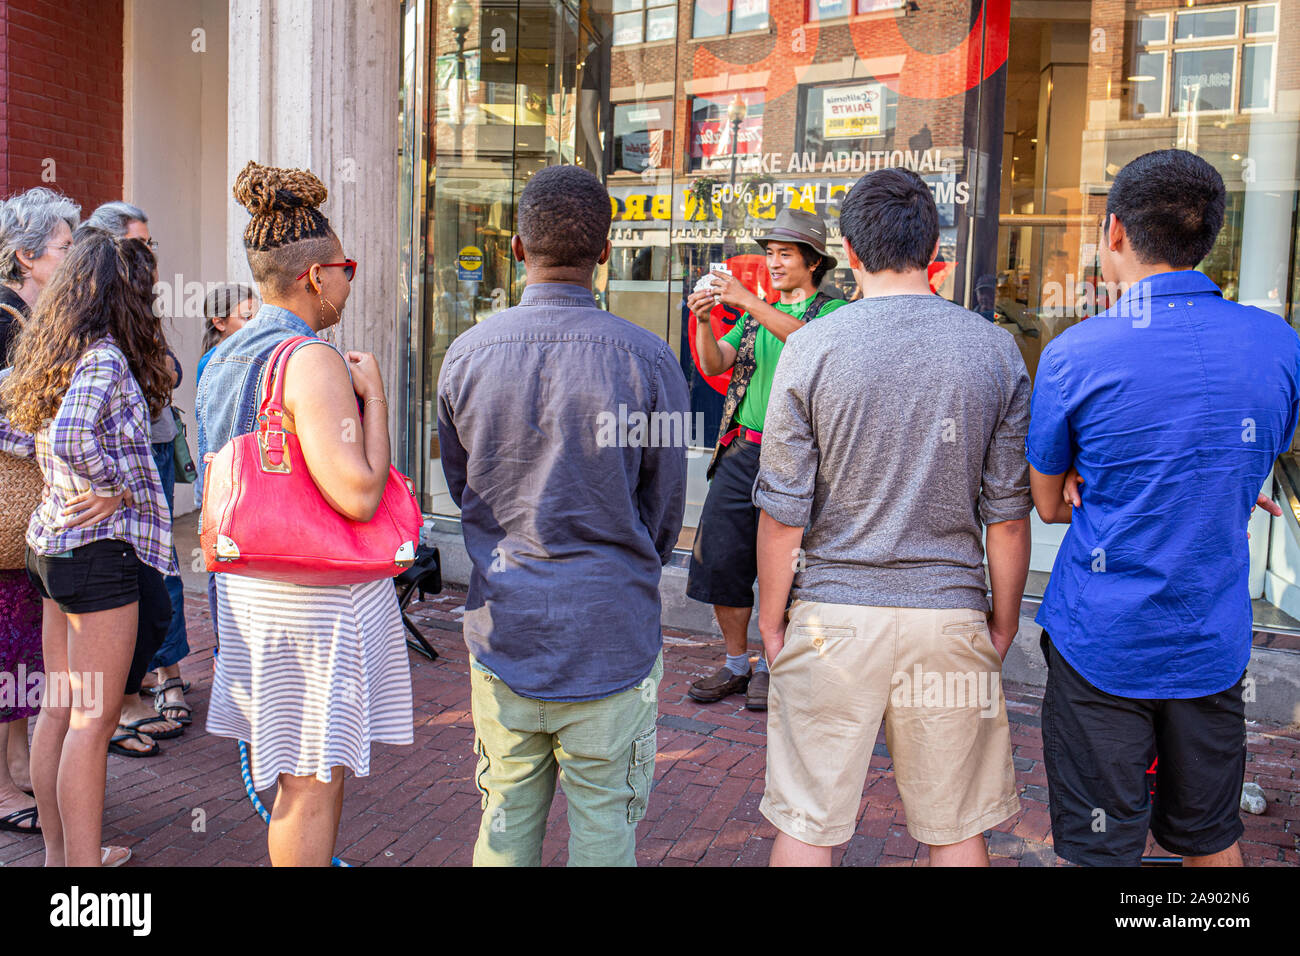 Street performer and his audience on Brattle Street in Cambridge, MA Stock Photo